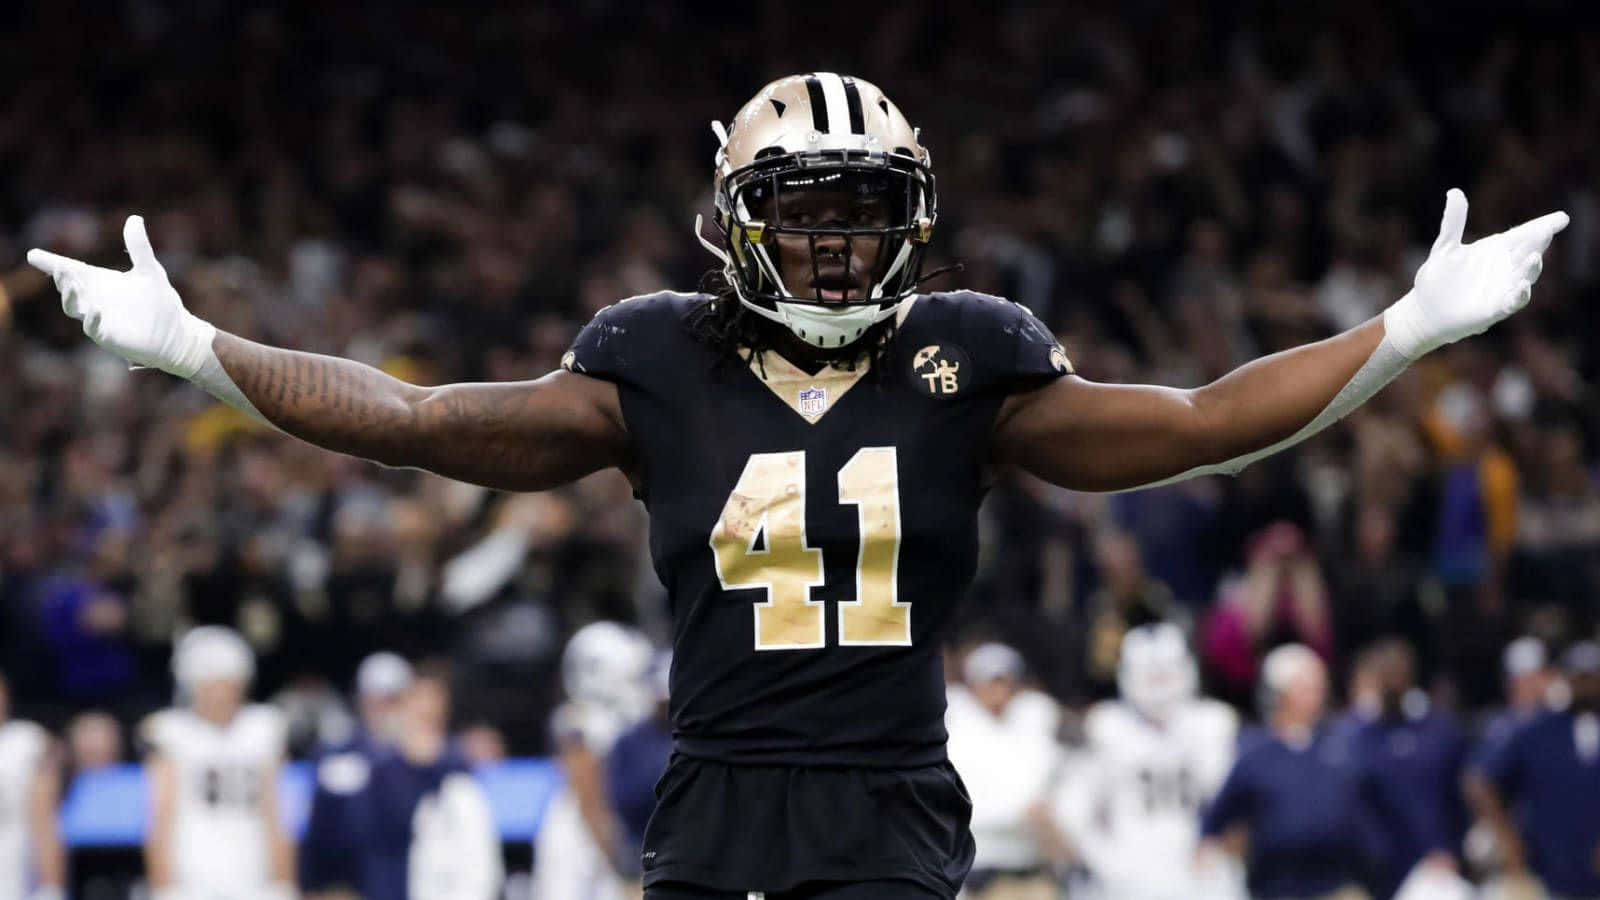 NFL running back Alvin Kamara takes off with the ball Wallpaper